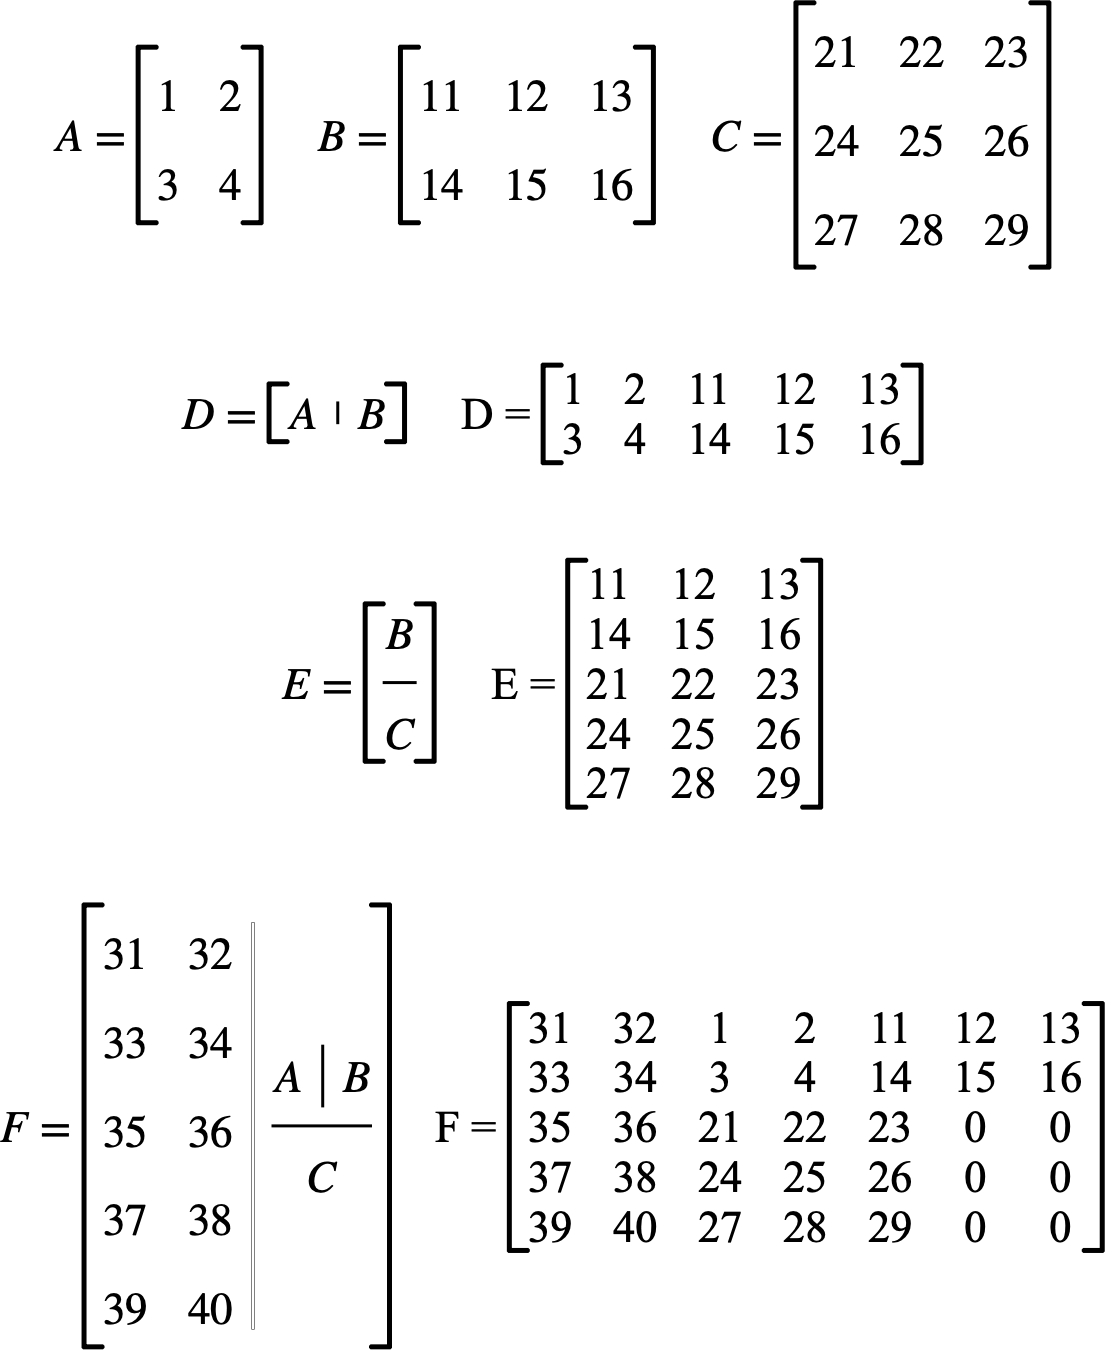 ../_images/combining_matrices_example.png